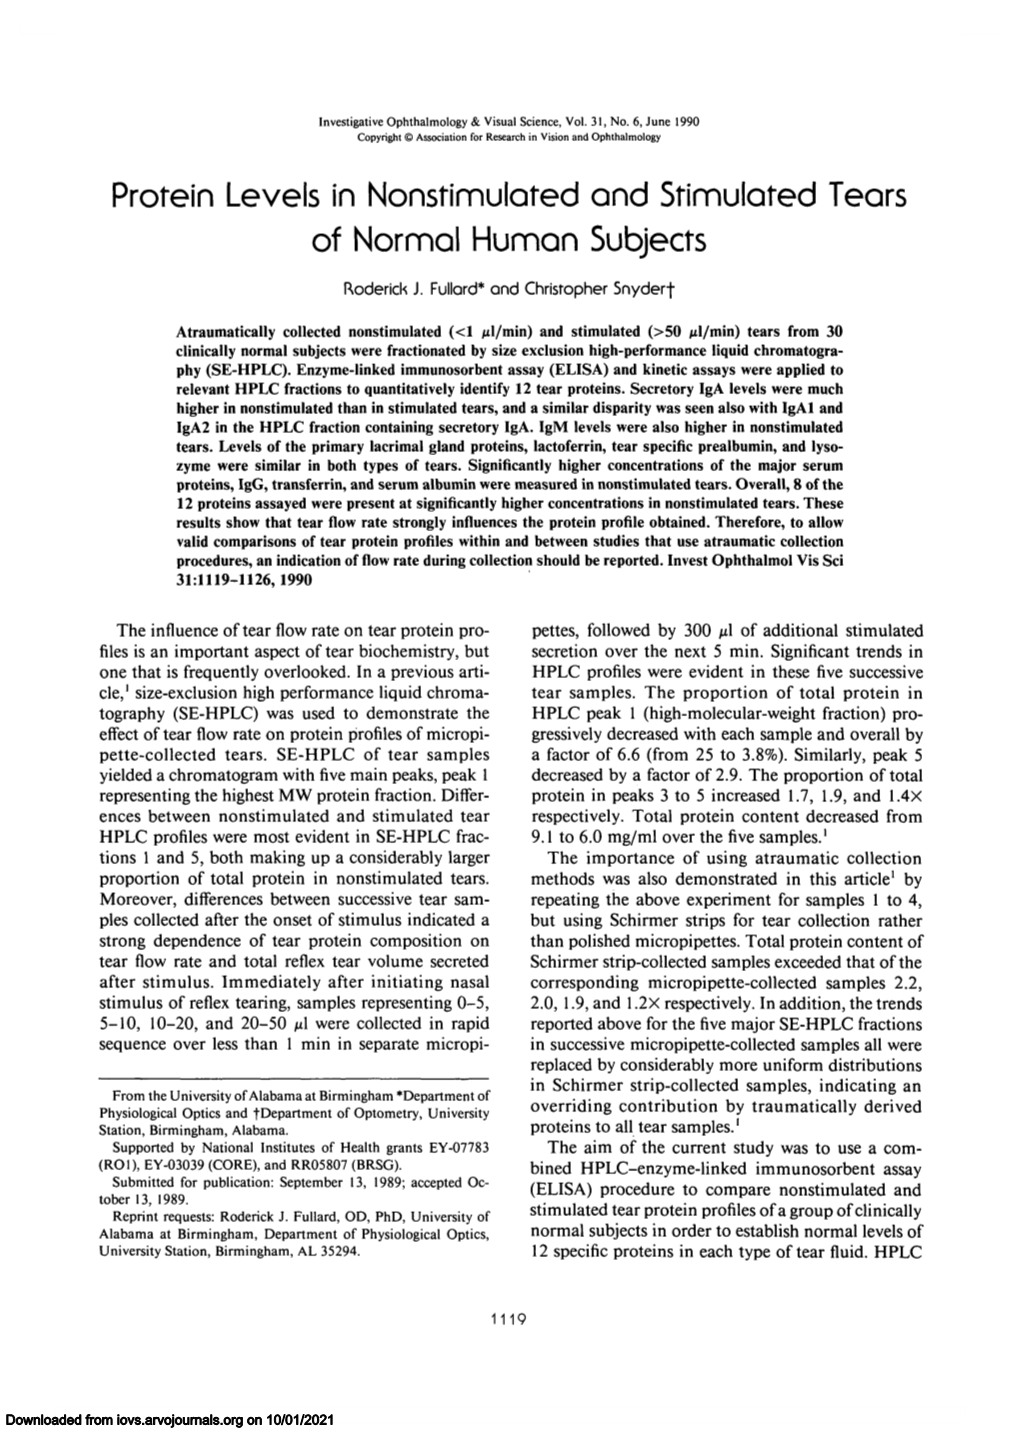 Protein Levels in Nonstimulated and Stimulated Tears of Normal Human Subjects